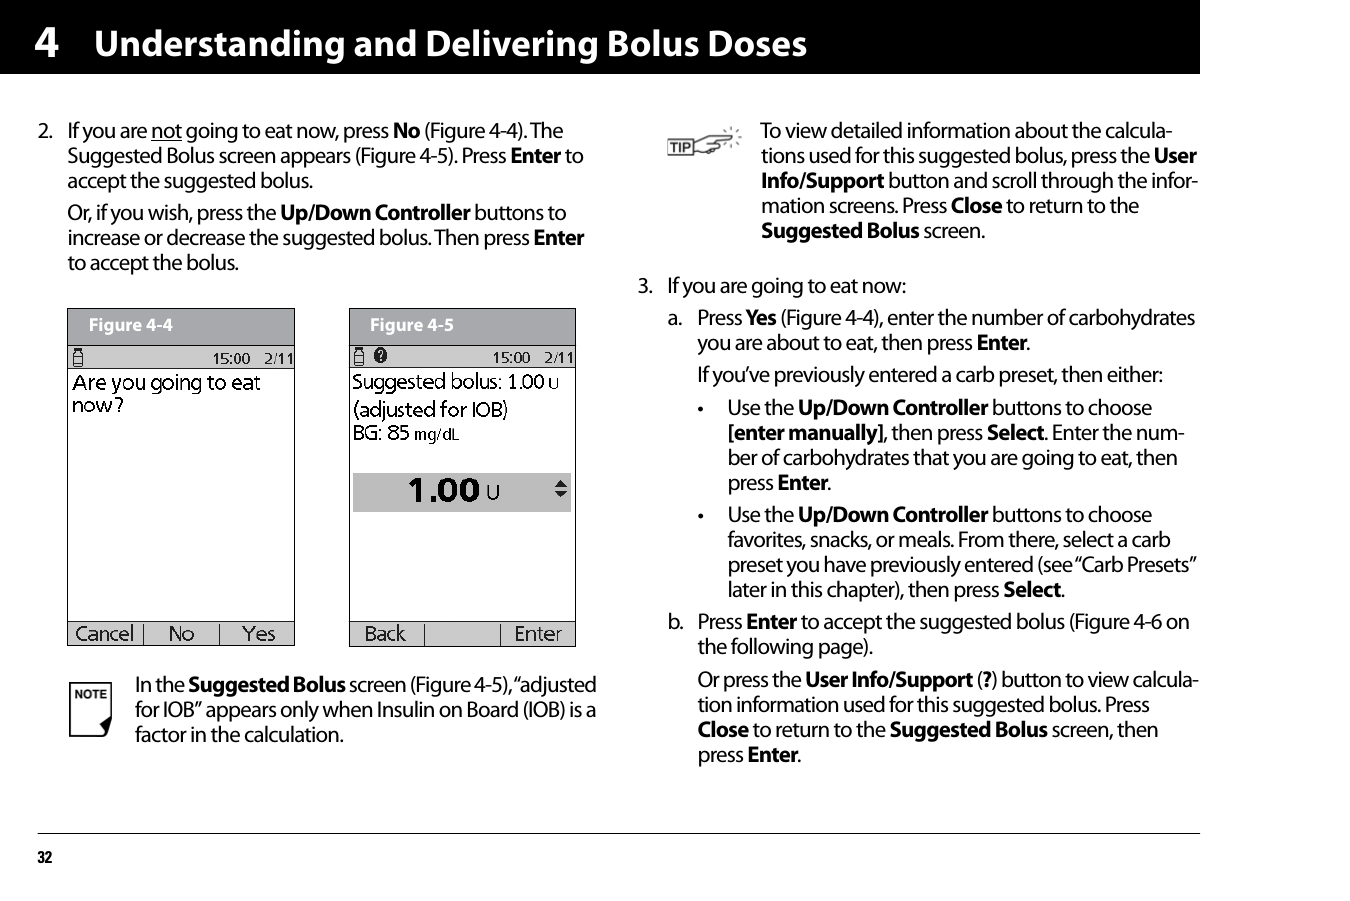 Understanding and Delivering Bolus Doses3242. If you are not going to eat now, press No (Figure 4-4). The Suggested Bolus screen appears (Figure 4-5). Press Enter to accept the suggested bolus.Or, if you wish, press the Up/Down Controller buttons to increase or decrease the suggested bolus. Then press Enter to accept the bolus.  3. If you are going to eat now:a. Press Yes (Figure 4-4), enter the number of carbohydrates you are about to eat, then press Enter.If you’ve previously entered a carb preset, then either:• Use the Up/Down Controller buttons to choose [enter manually], then press Select. Enter the num-ber of carbohydrates that you are going to eat, then press Enter.• Use the Up/Down Controller buttons to choose favorites, snacks, or meals. From there, select a carb preset you have previously entered (see “Carb Presets” later in this chapter), then press Select.b. Press Enter to accept the suggested bolus (Figure 4-6 on the following page).Or press the User Info/Support (?) button to view calcula-tion information used for this suggested bolus. Press Close to return to the Suggested Bolus screen, then press Enter.In the Suggested Bolus screen (Figure 4-5), “adjusted for IOB” appears only when Insulin on Board (IOB) is a factor in the calculation.Figure 4-4 Figure 4-5To view detailed information about the calcula-tions used for this suggested bolus, press the User Info/Support button and scroll through the infor-mation screens. Press Close to return to the Suggested Bolus screen.